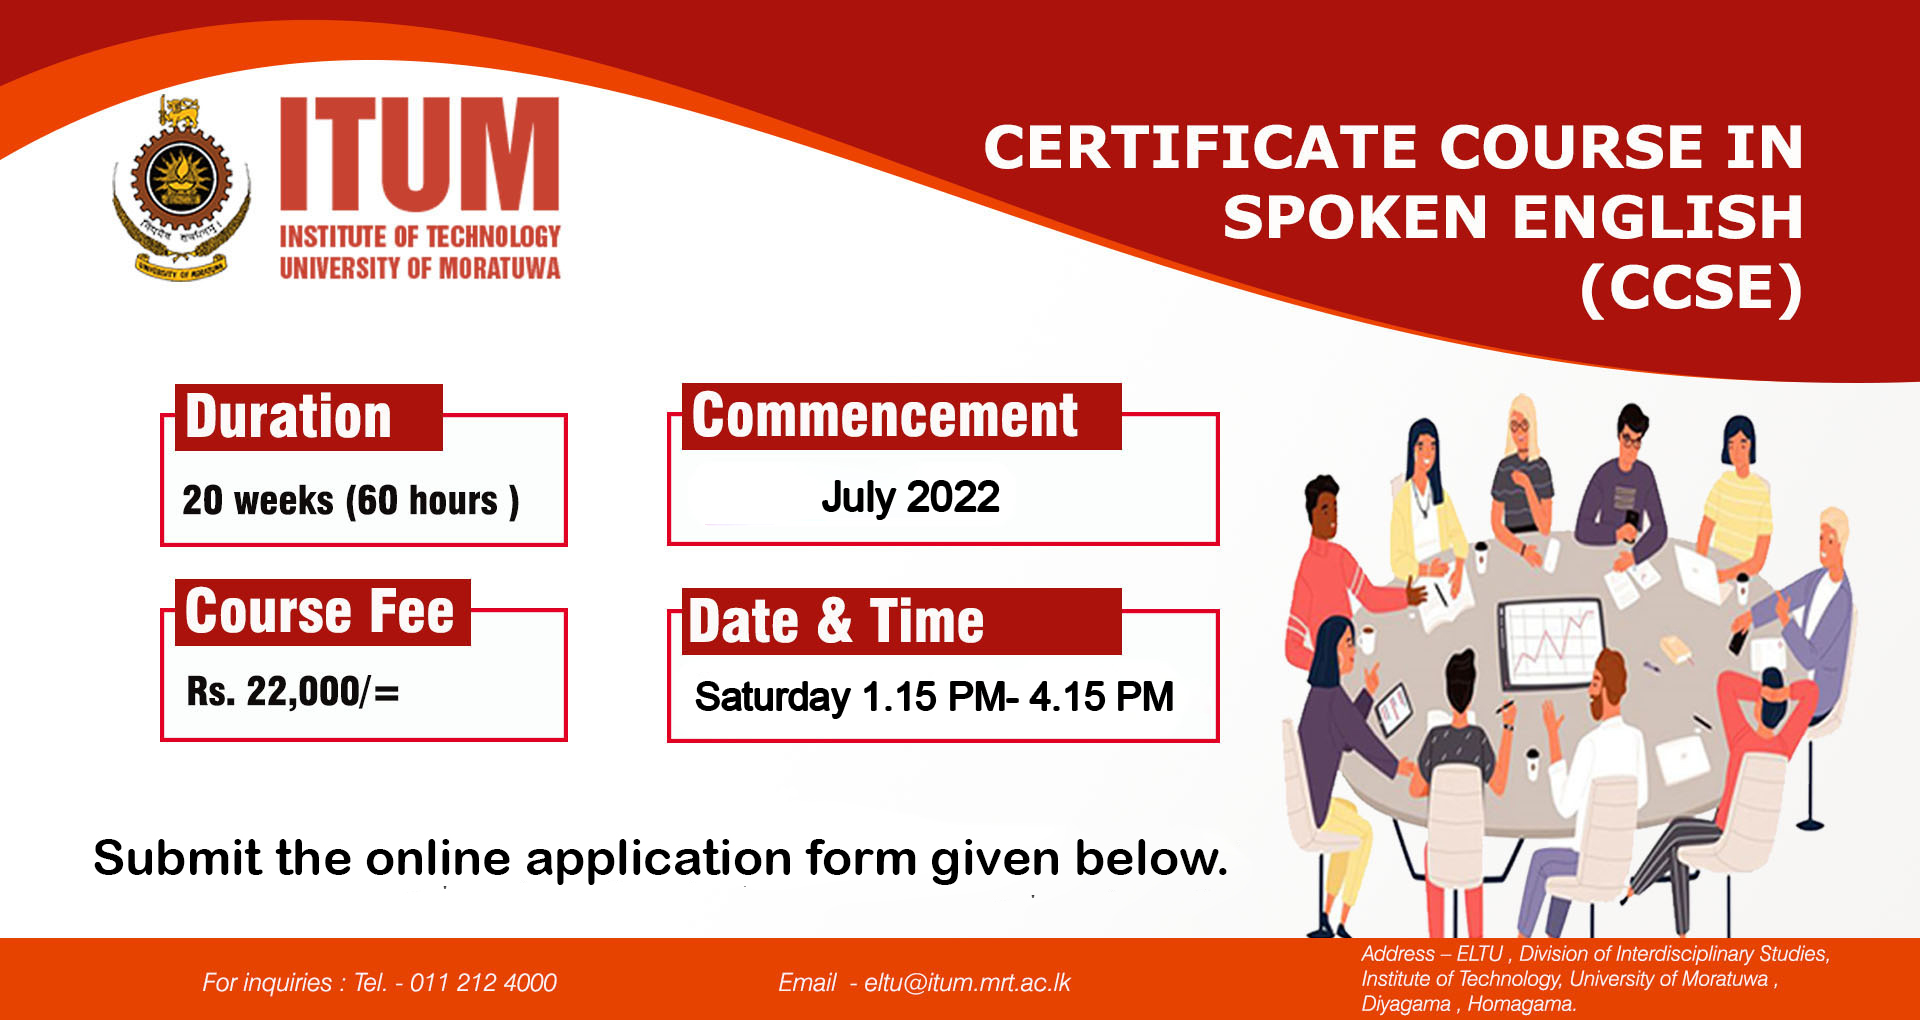 Certificate Course In Spoken English (CCSE) - Institute of Technology